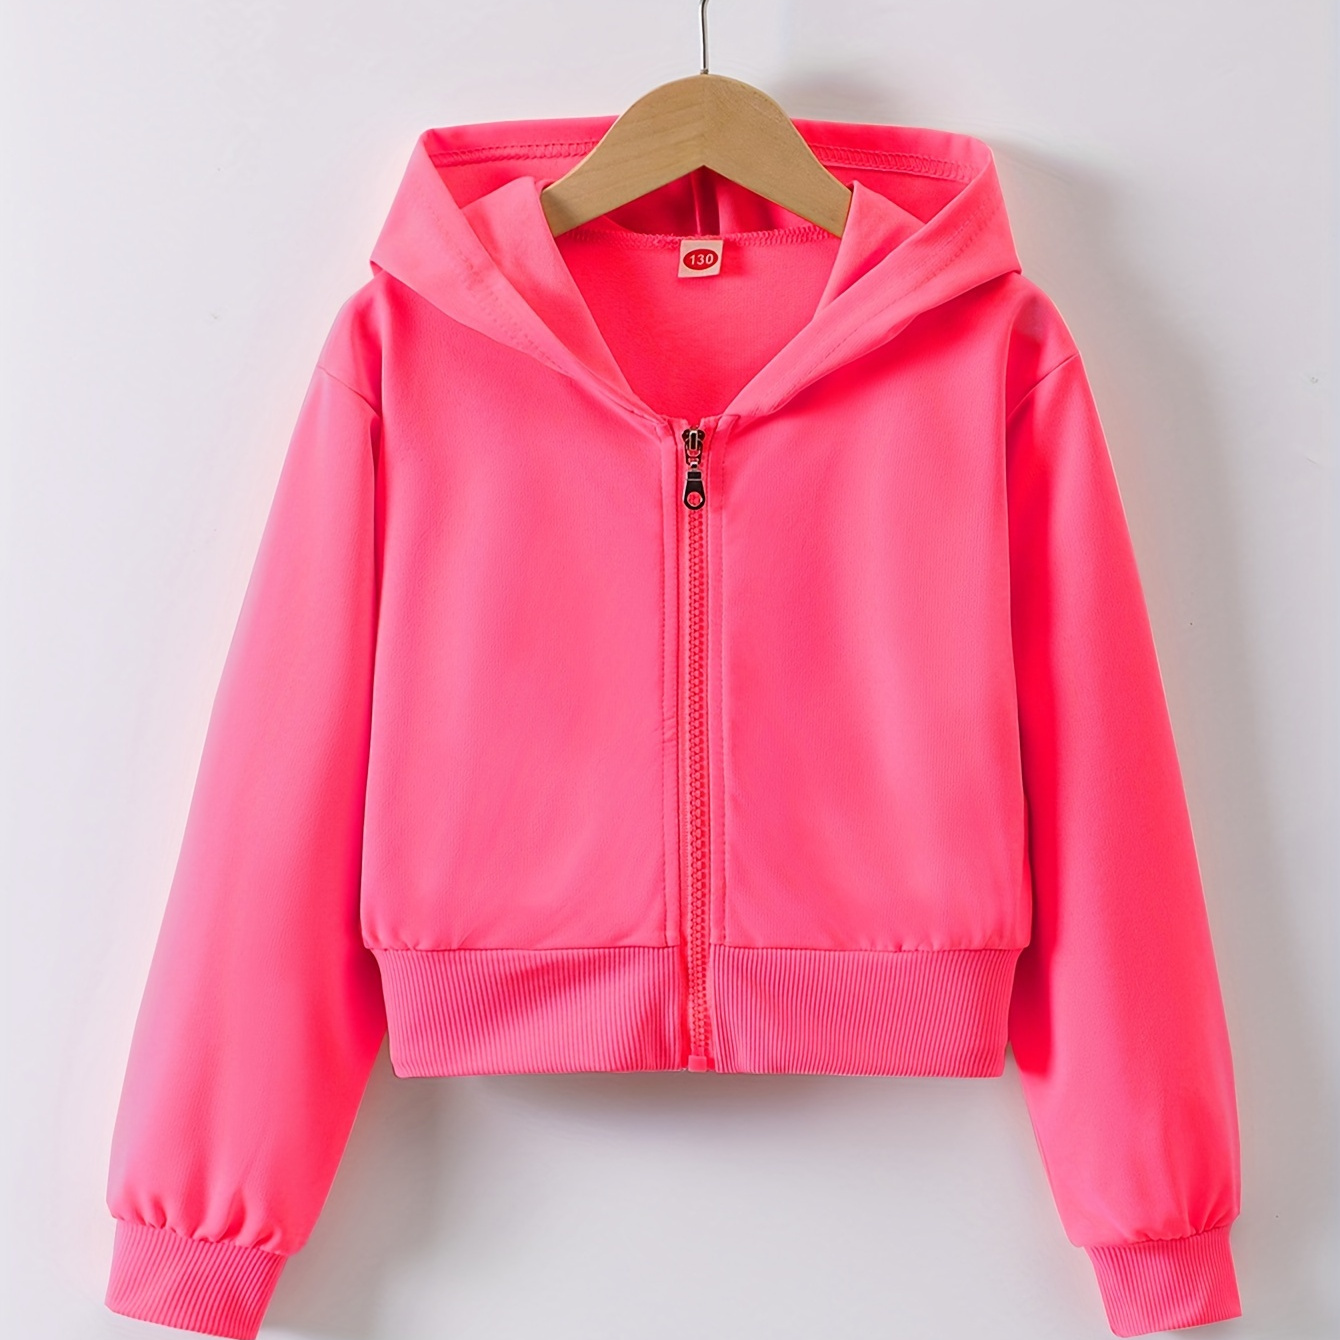 

Plain Color Girl's Casual Zip-up Hoodie Jacket Cropped Length, Girls Outerwear For Spring/fall